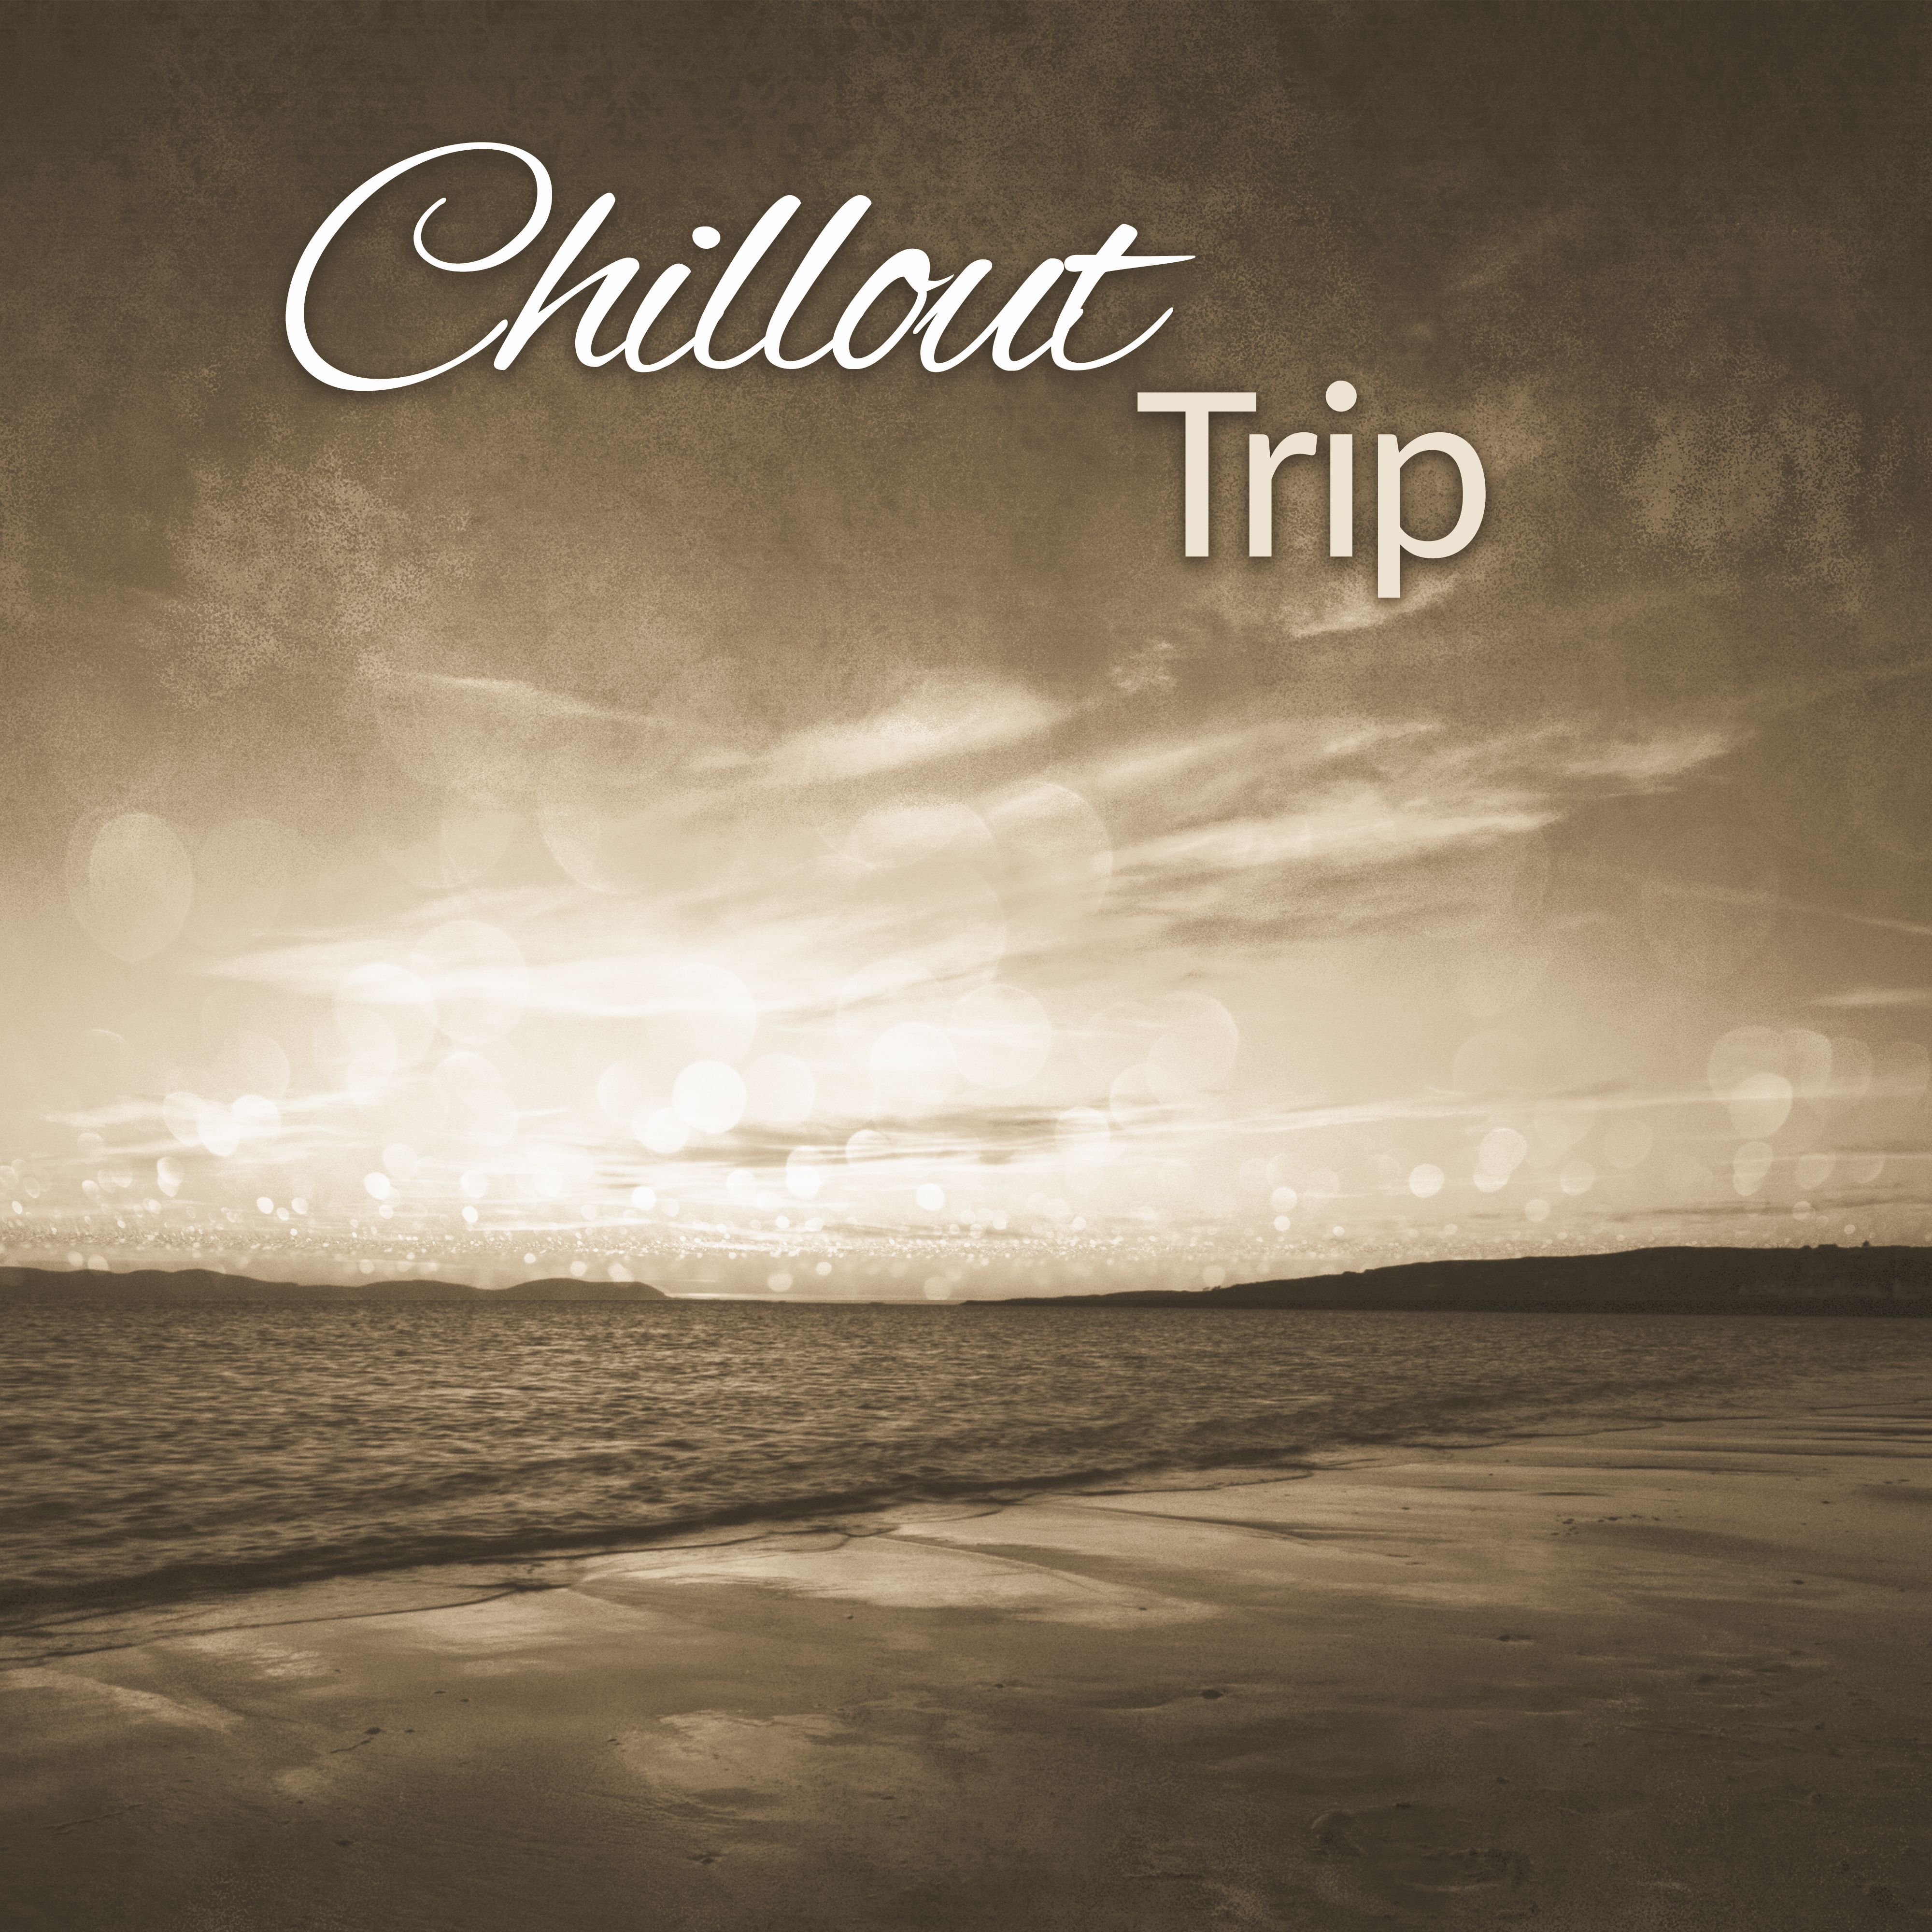 Chillout Trip  Hot Chill Out Music, Relax, Good Vibes Only, Best Way to Chillout